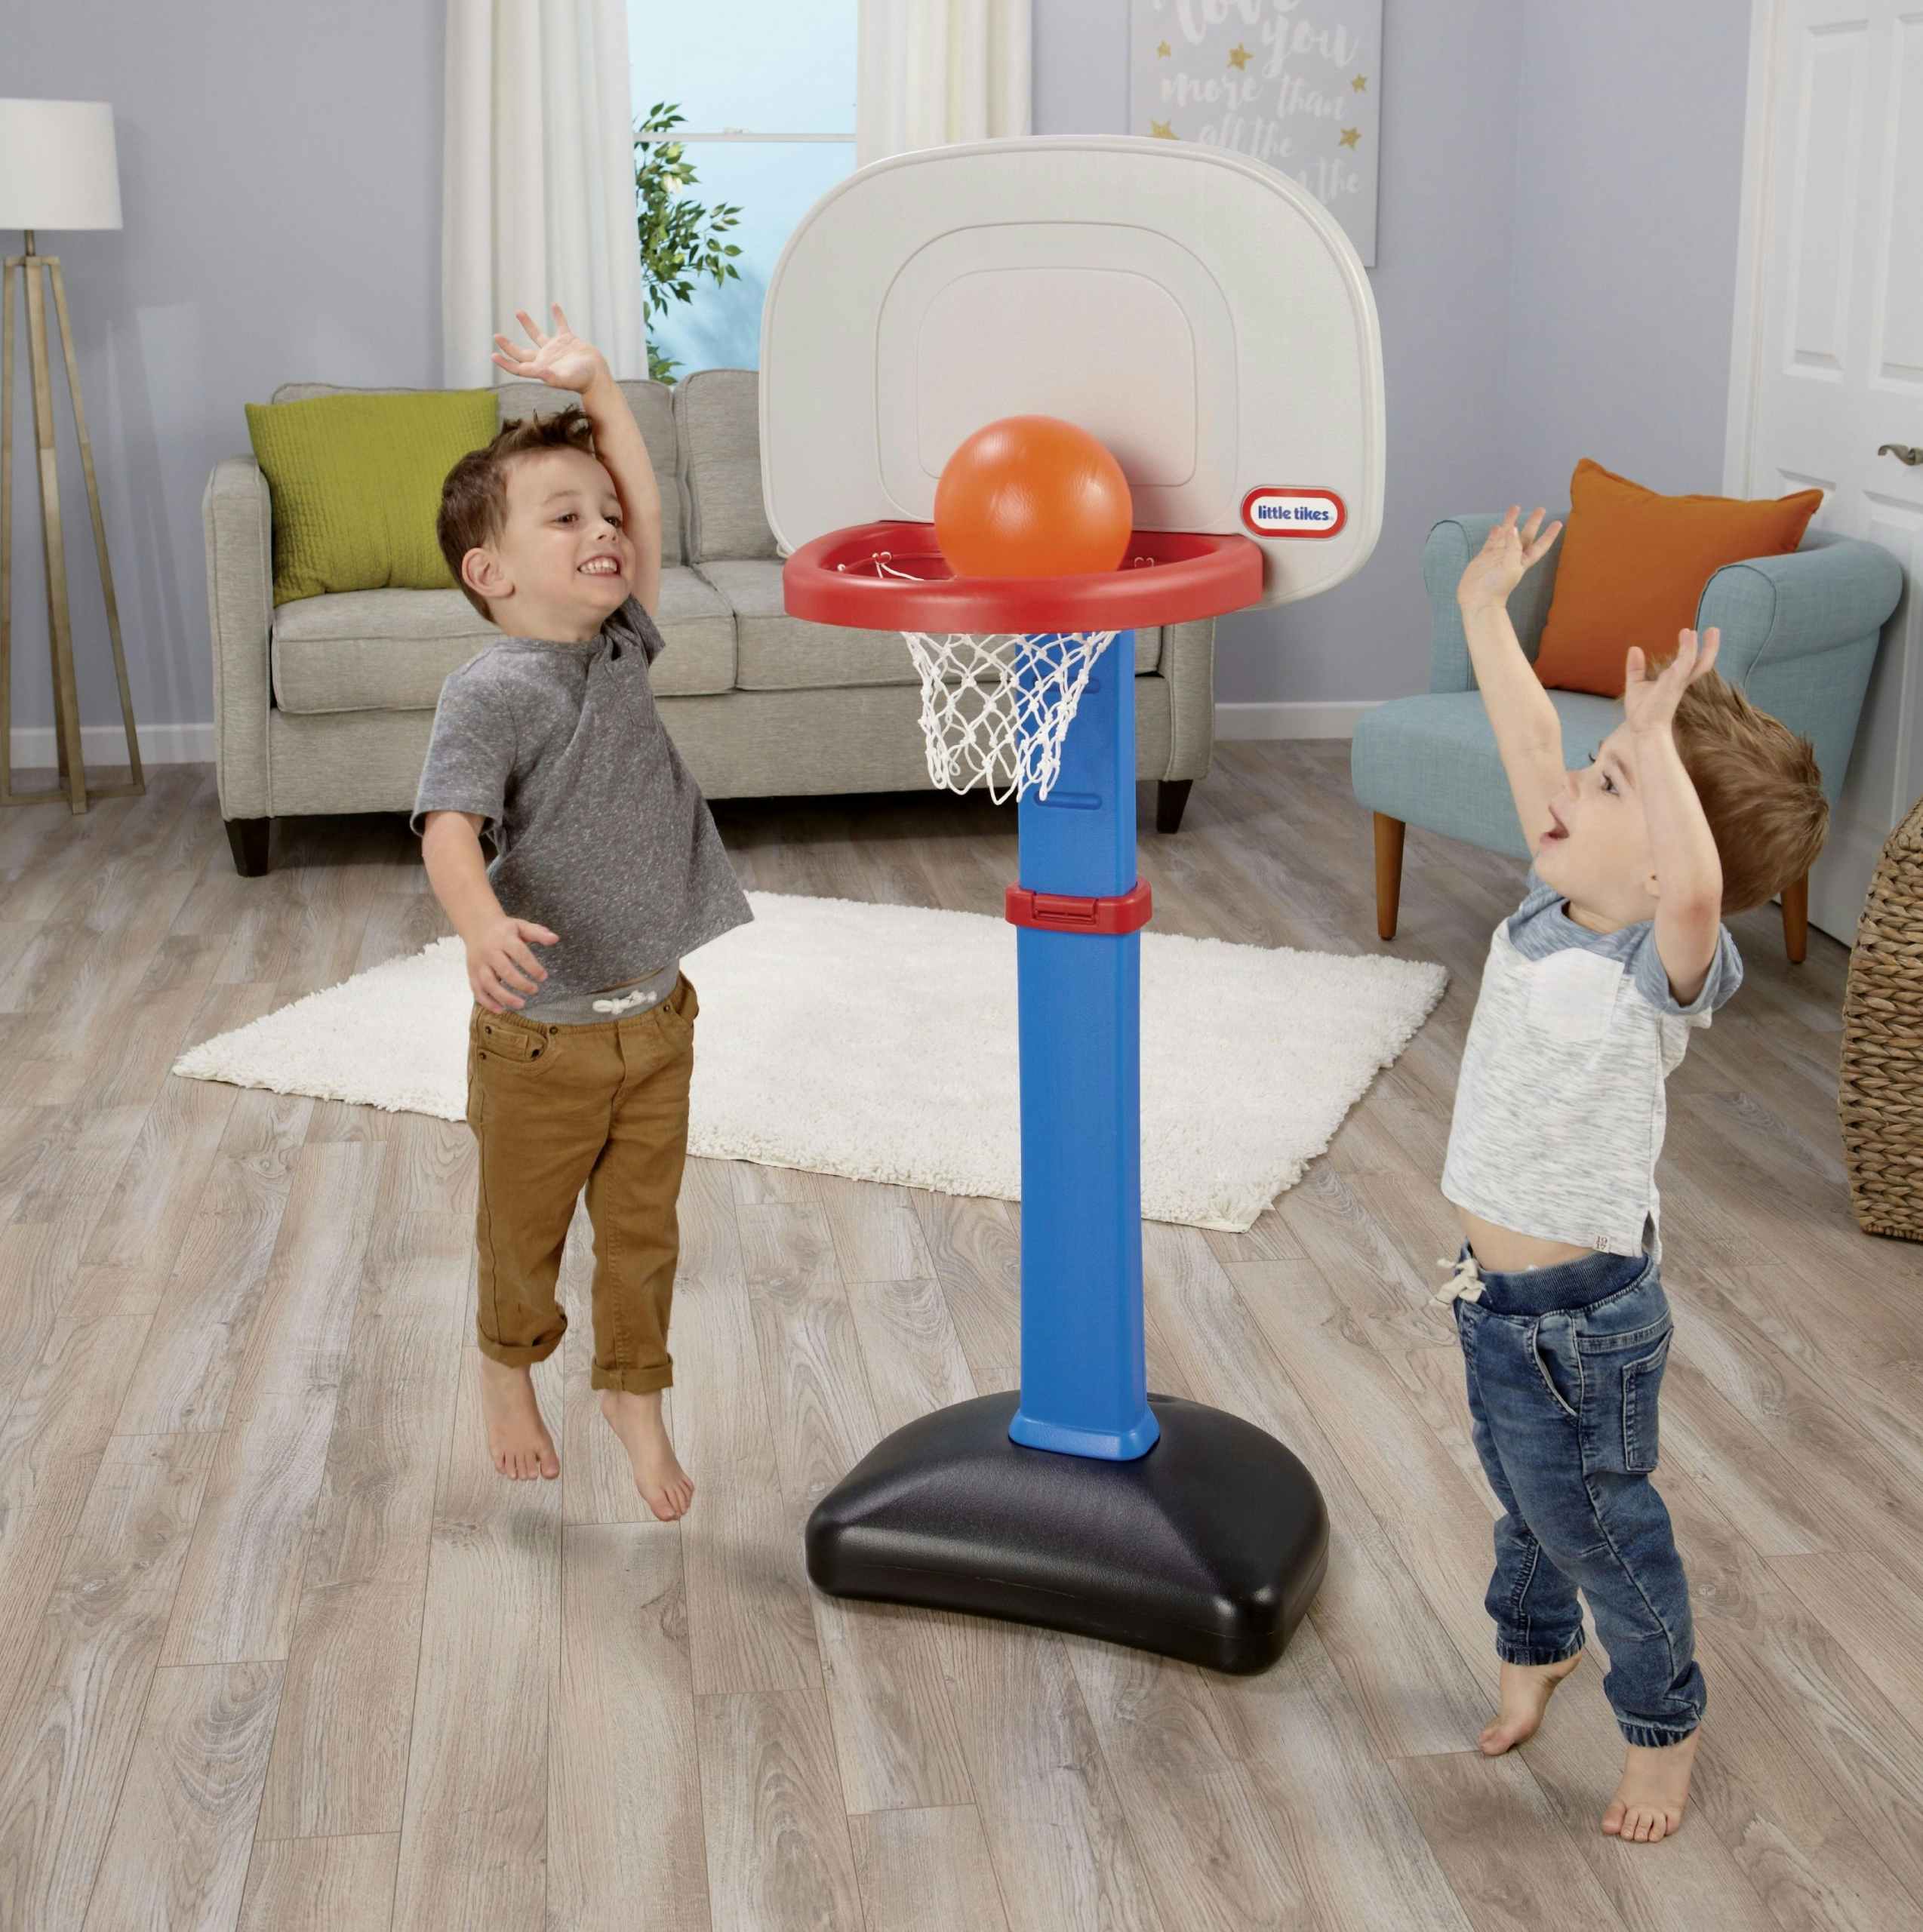 Two kids playing with the Little Tikes basketball hoop.